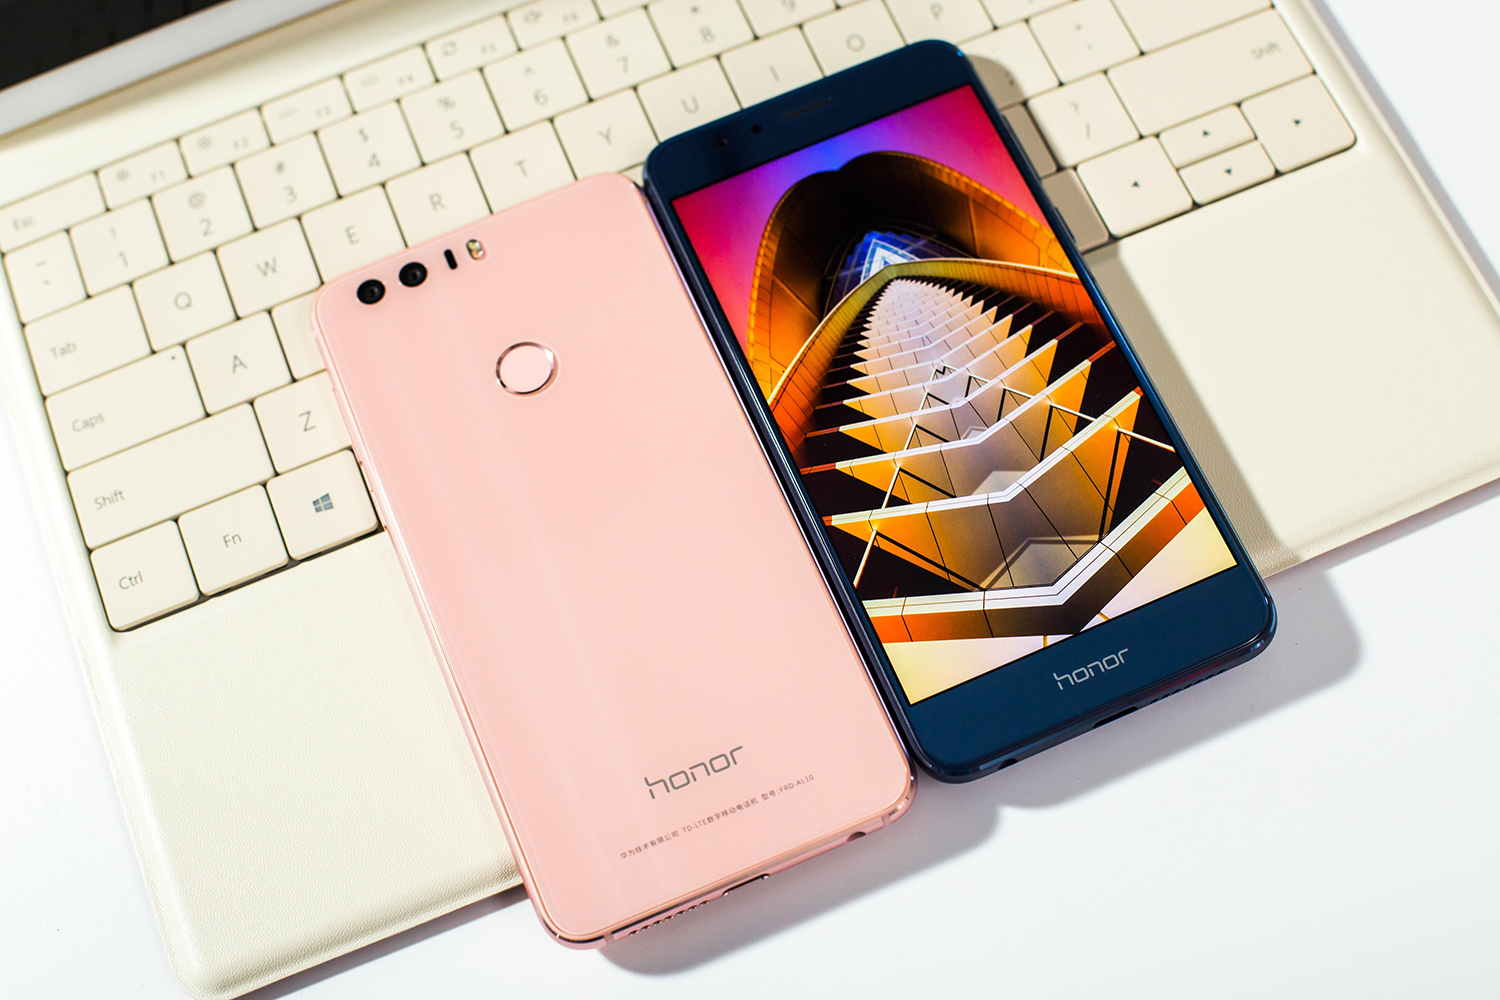 Honor 8 Sakura Pink Now Available in Limited Quantities